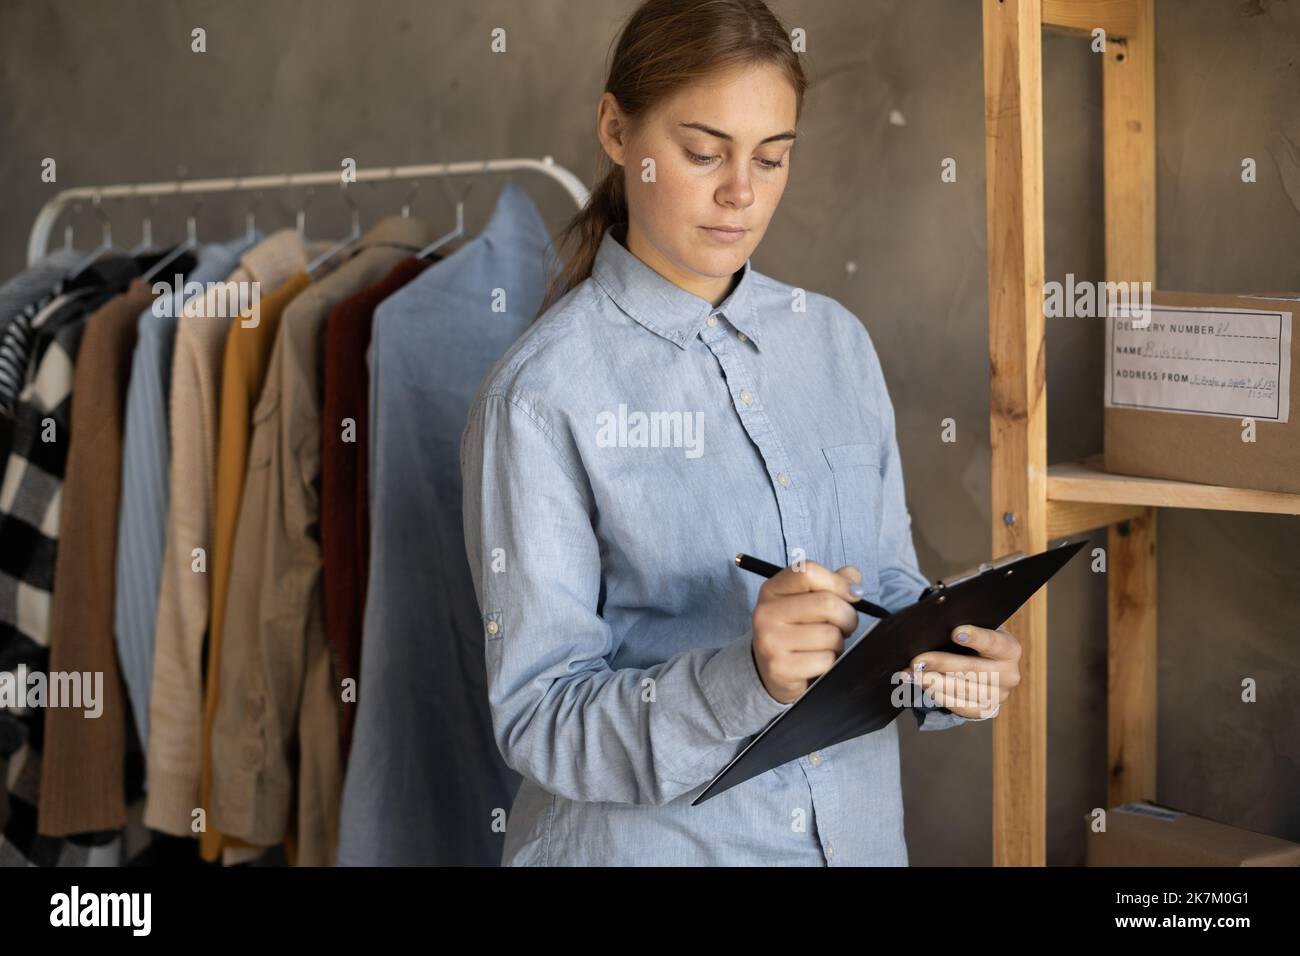 Female small business owner, entrepreneur, shipment delivery dropshipping service worker checking ecommerce order standing in warehouse with clipboard Stock Photo